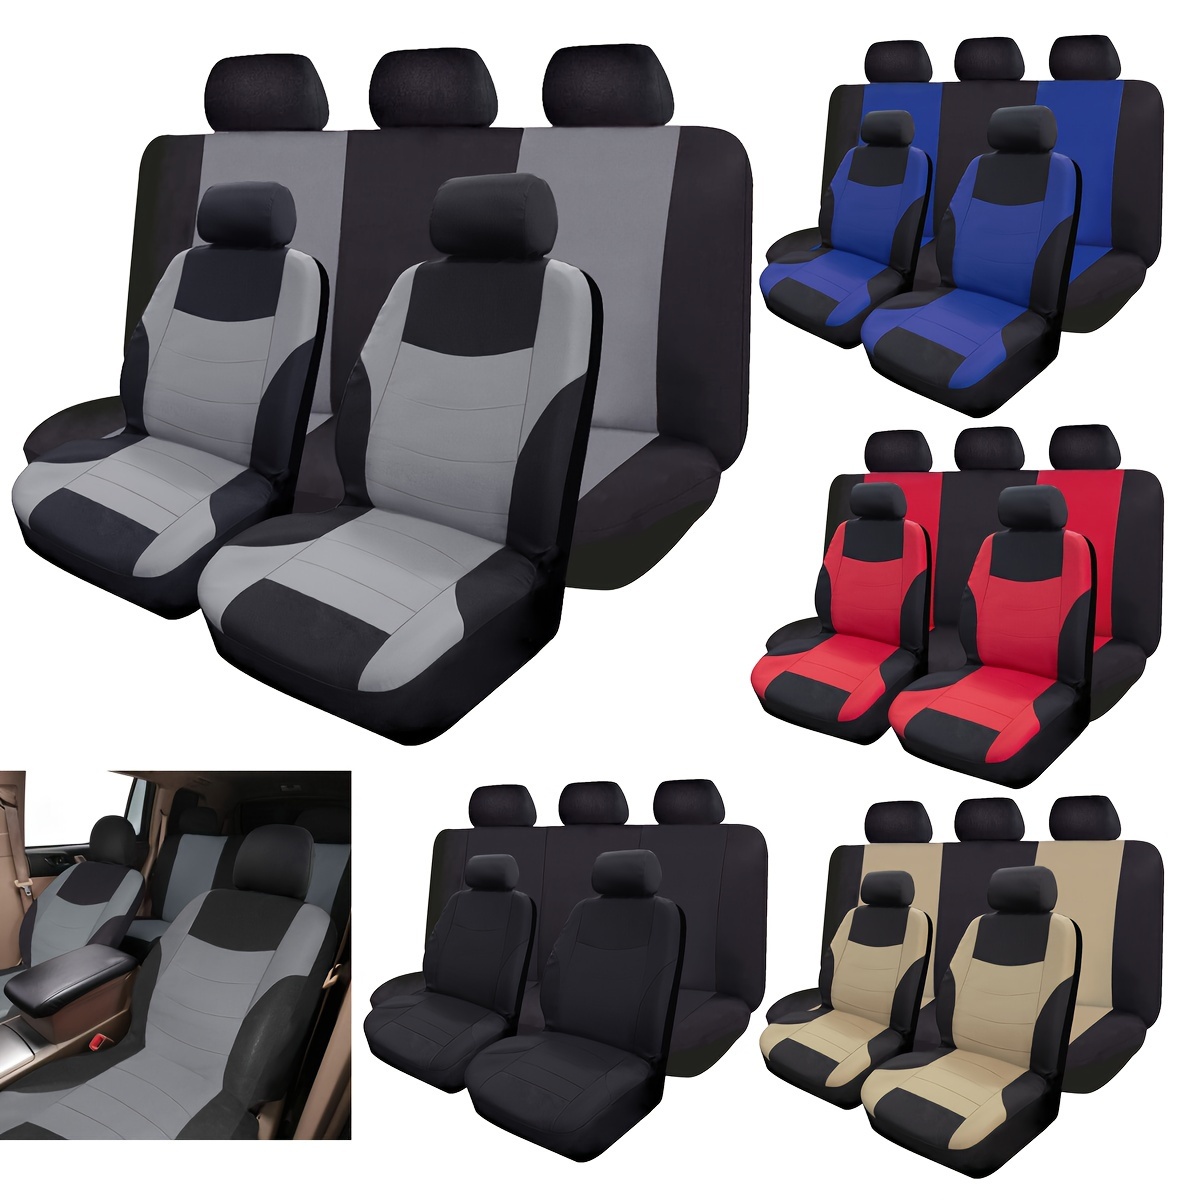 

Universal Fit Polyester Car Seat Cover Set With Sponge Filler - Breathable, Comfortable, Hand Washable - Suitable For All Seasons